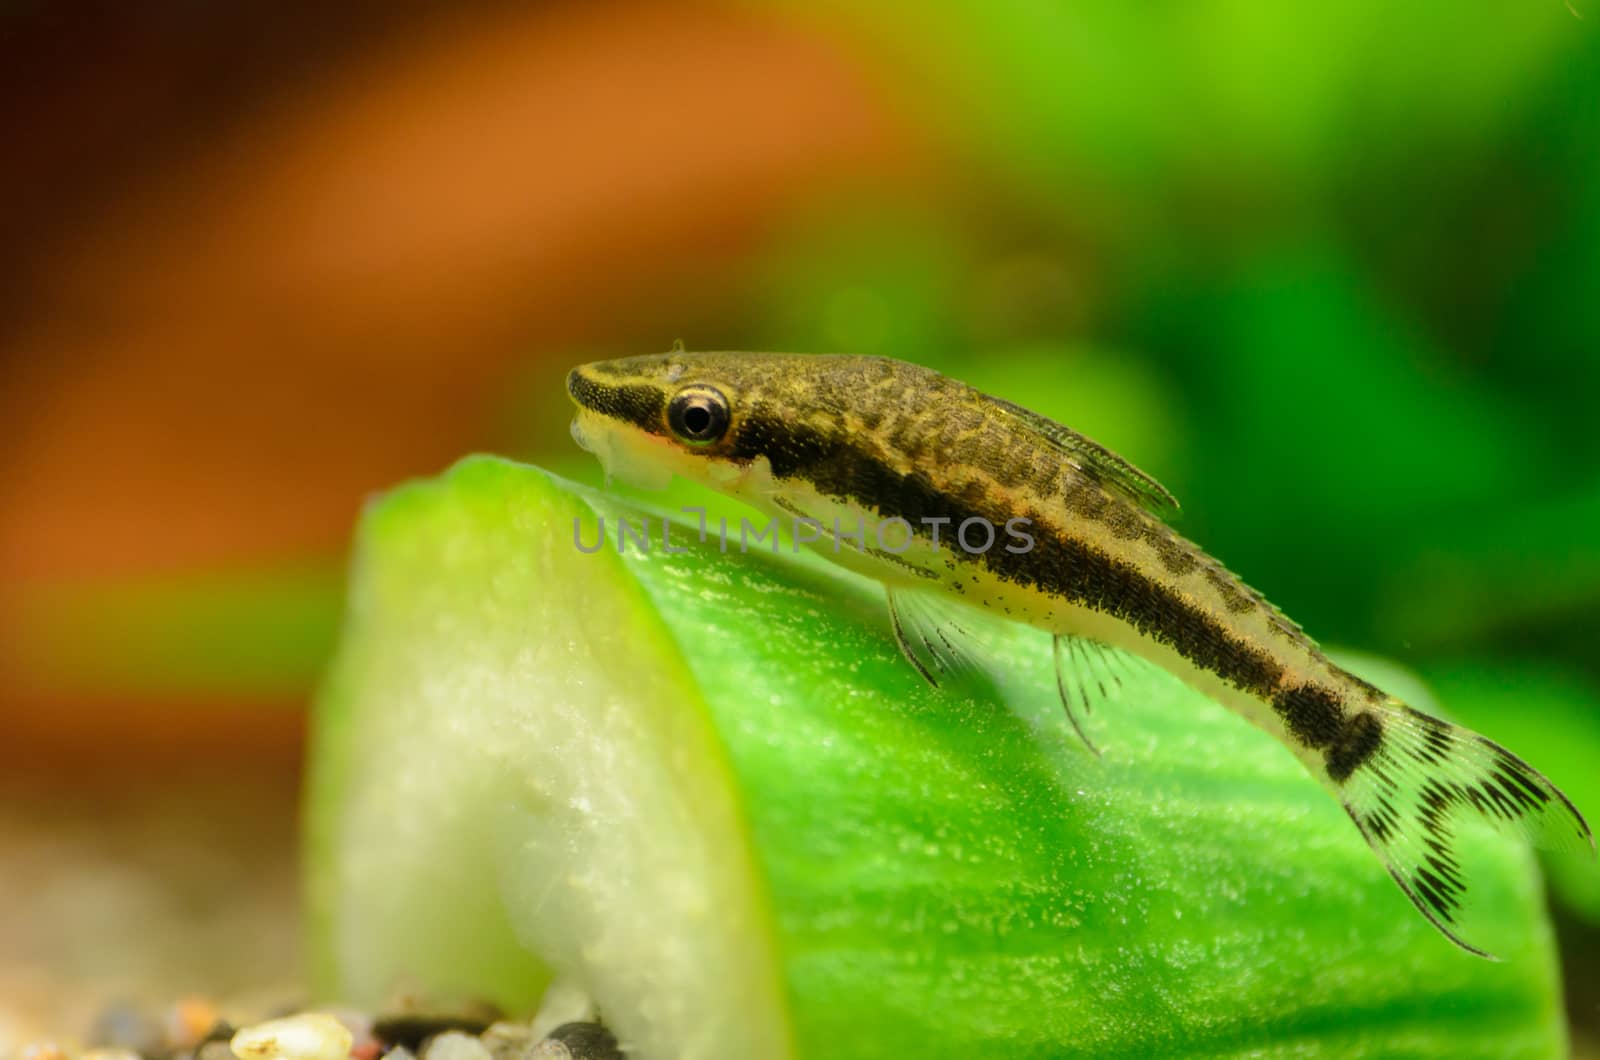 This is a South American Tropical fish called the Otocinclus Vitatus. Here it is pictured on a piece of cucumber.